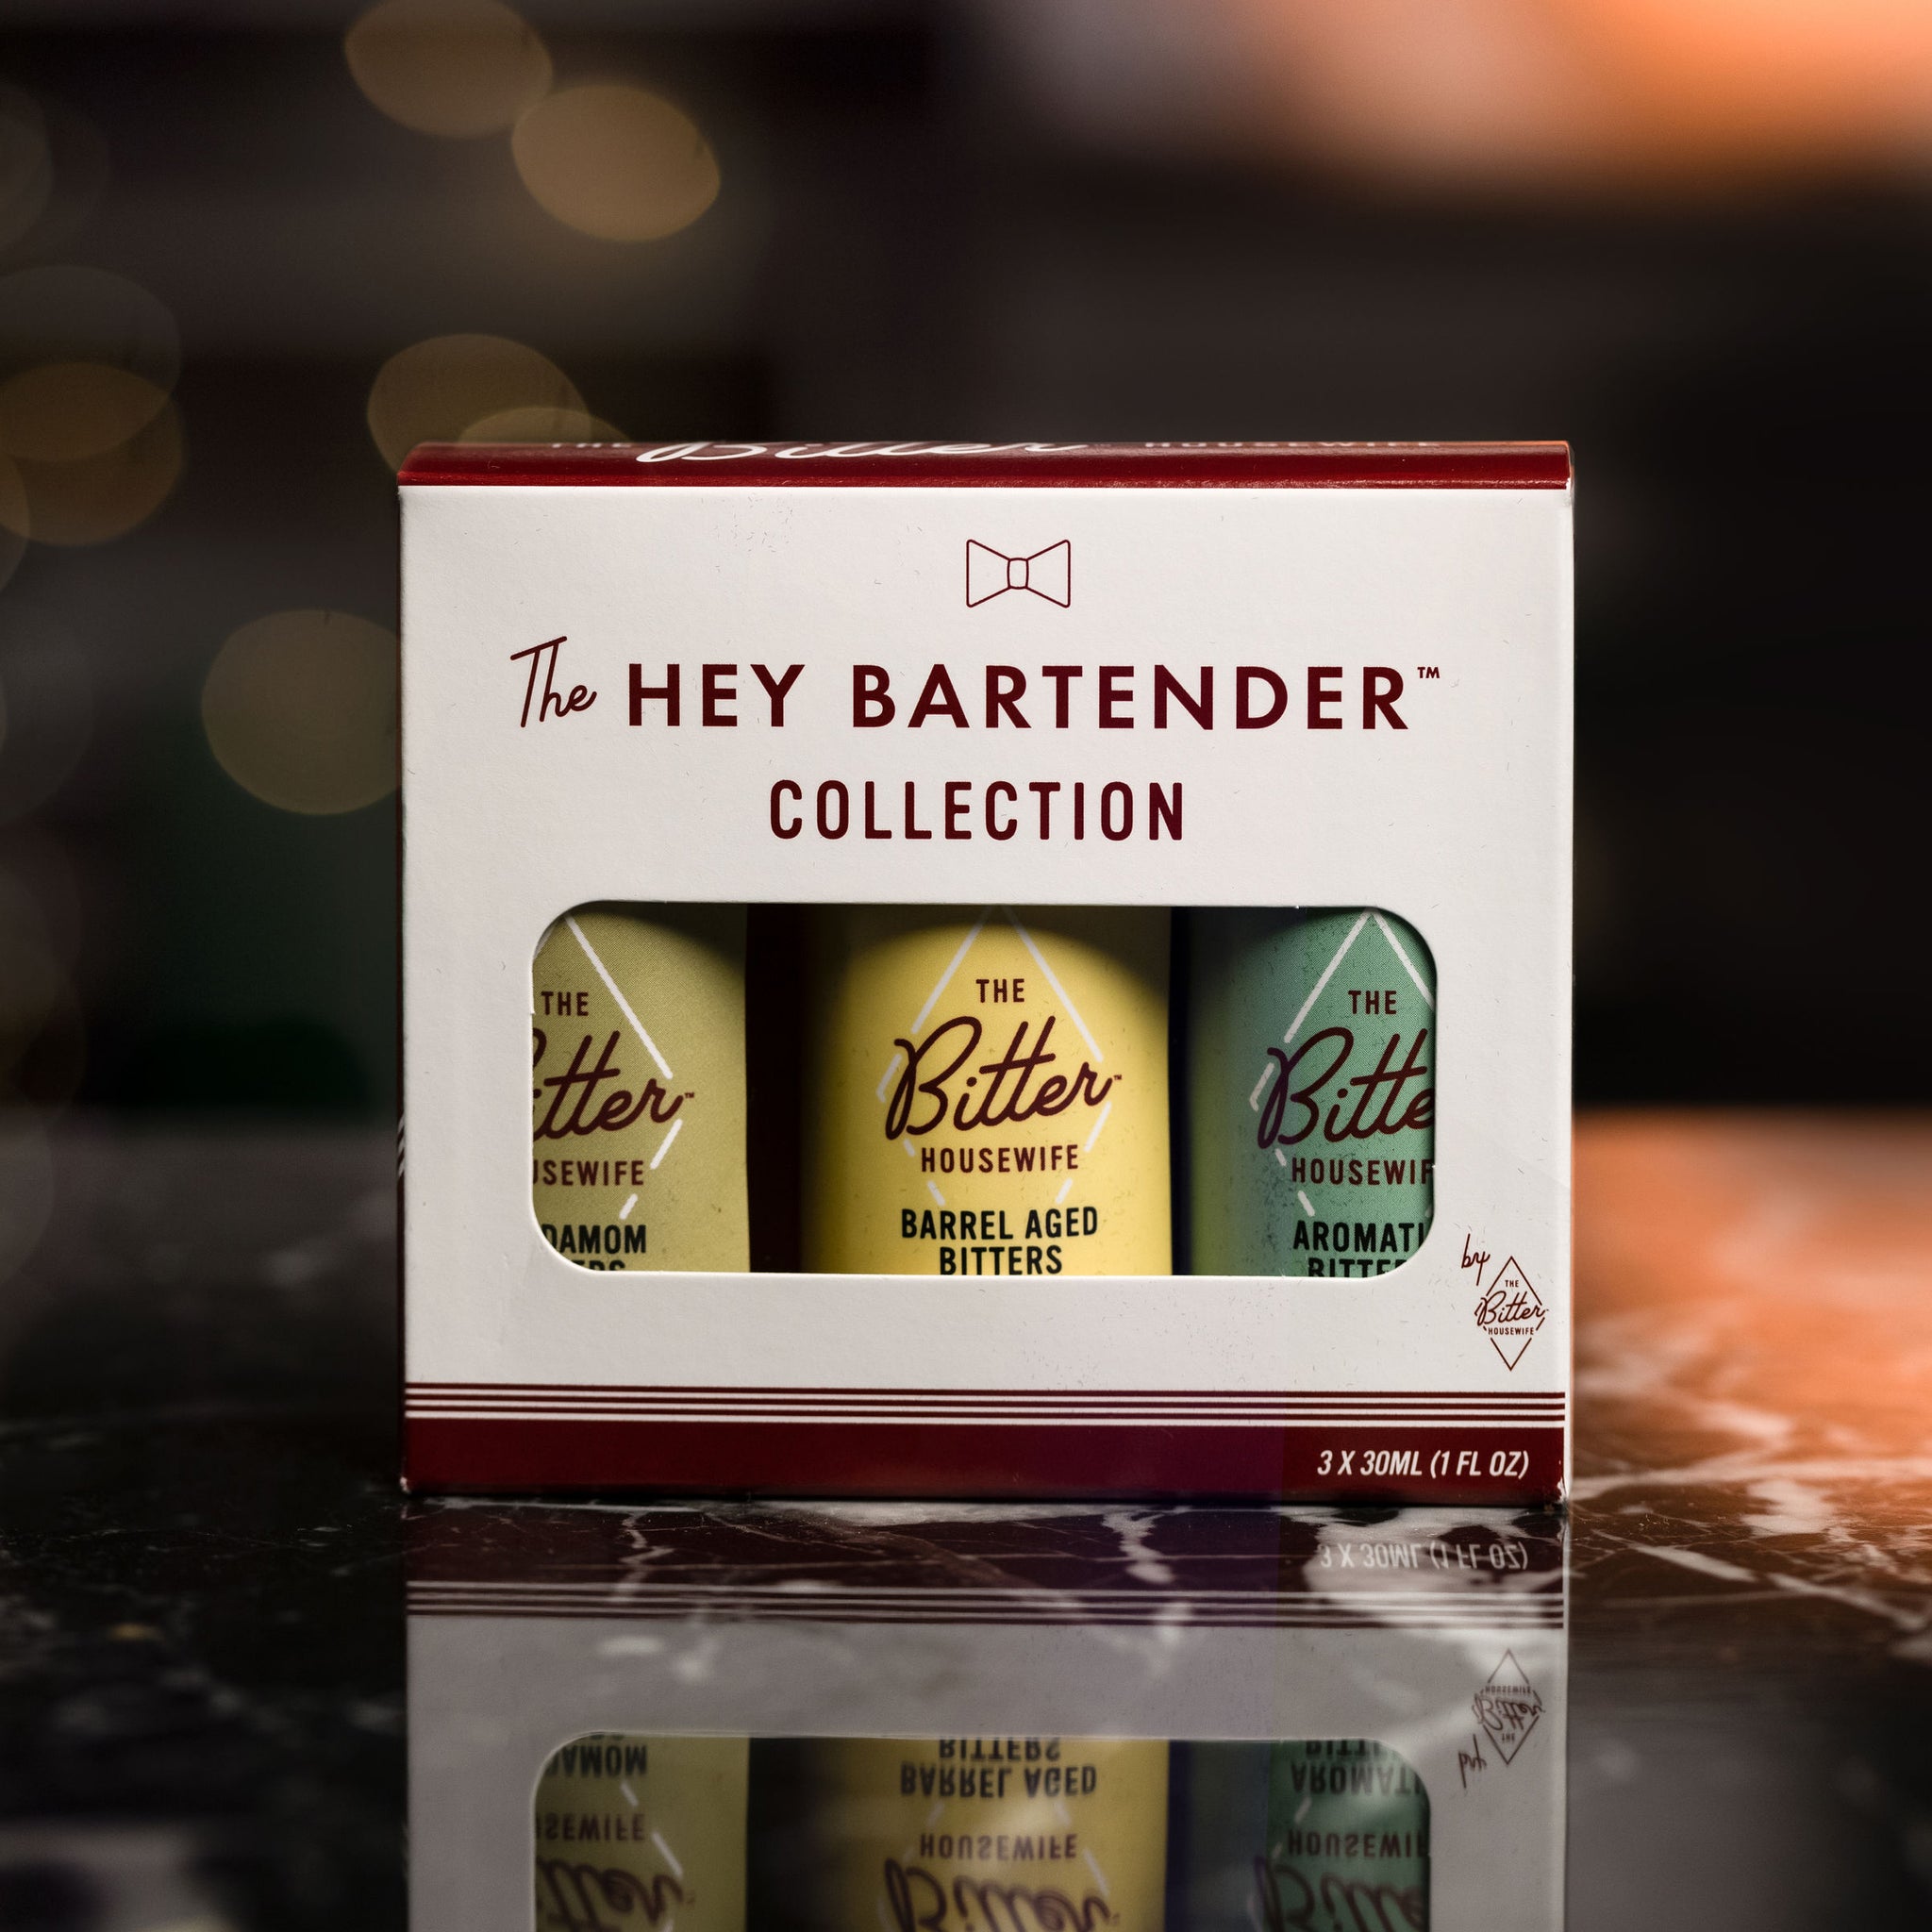 Hey Bartender Bitters Collect: a gift set or sample pack of 3 different types of bitters in partnership with the Bitter Housewife- another female founded brand. Use bitters to experiment and try out the different types: Cardamom, Barrel Aged and Aromatic. Perfect stocking stuffer for the holidays